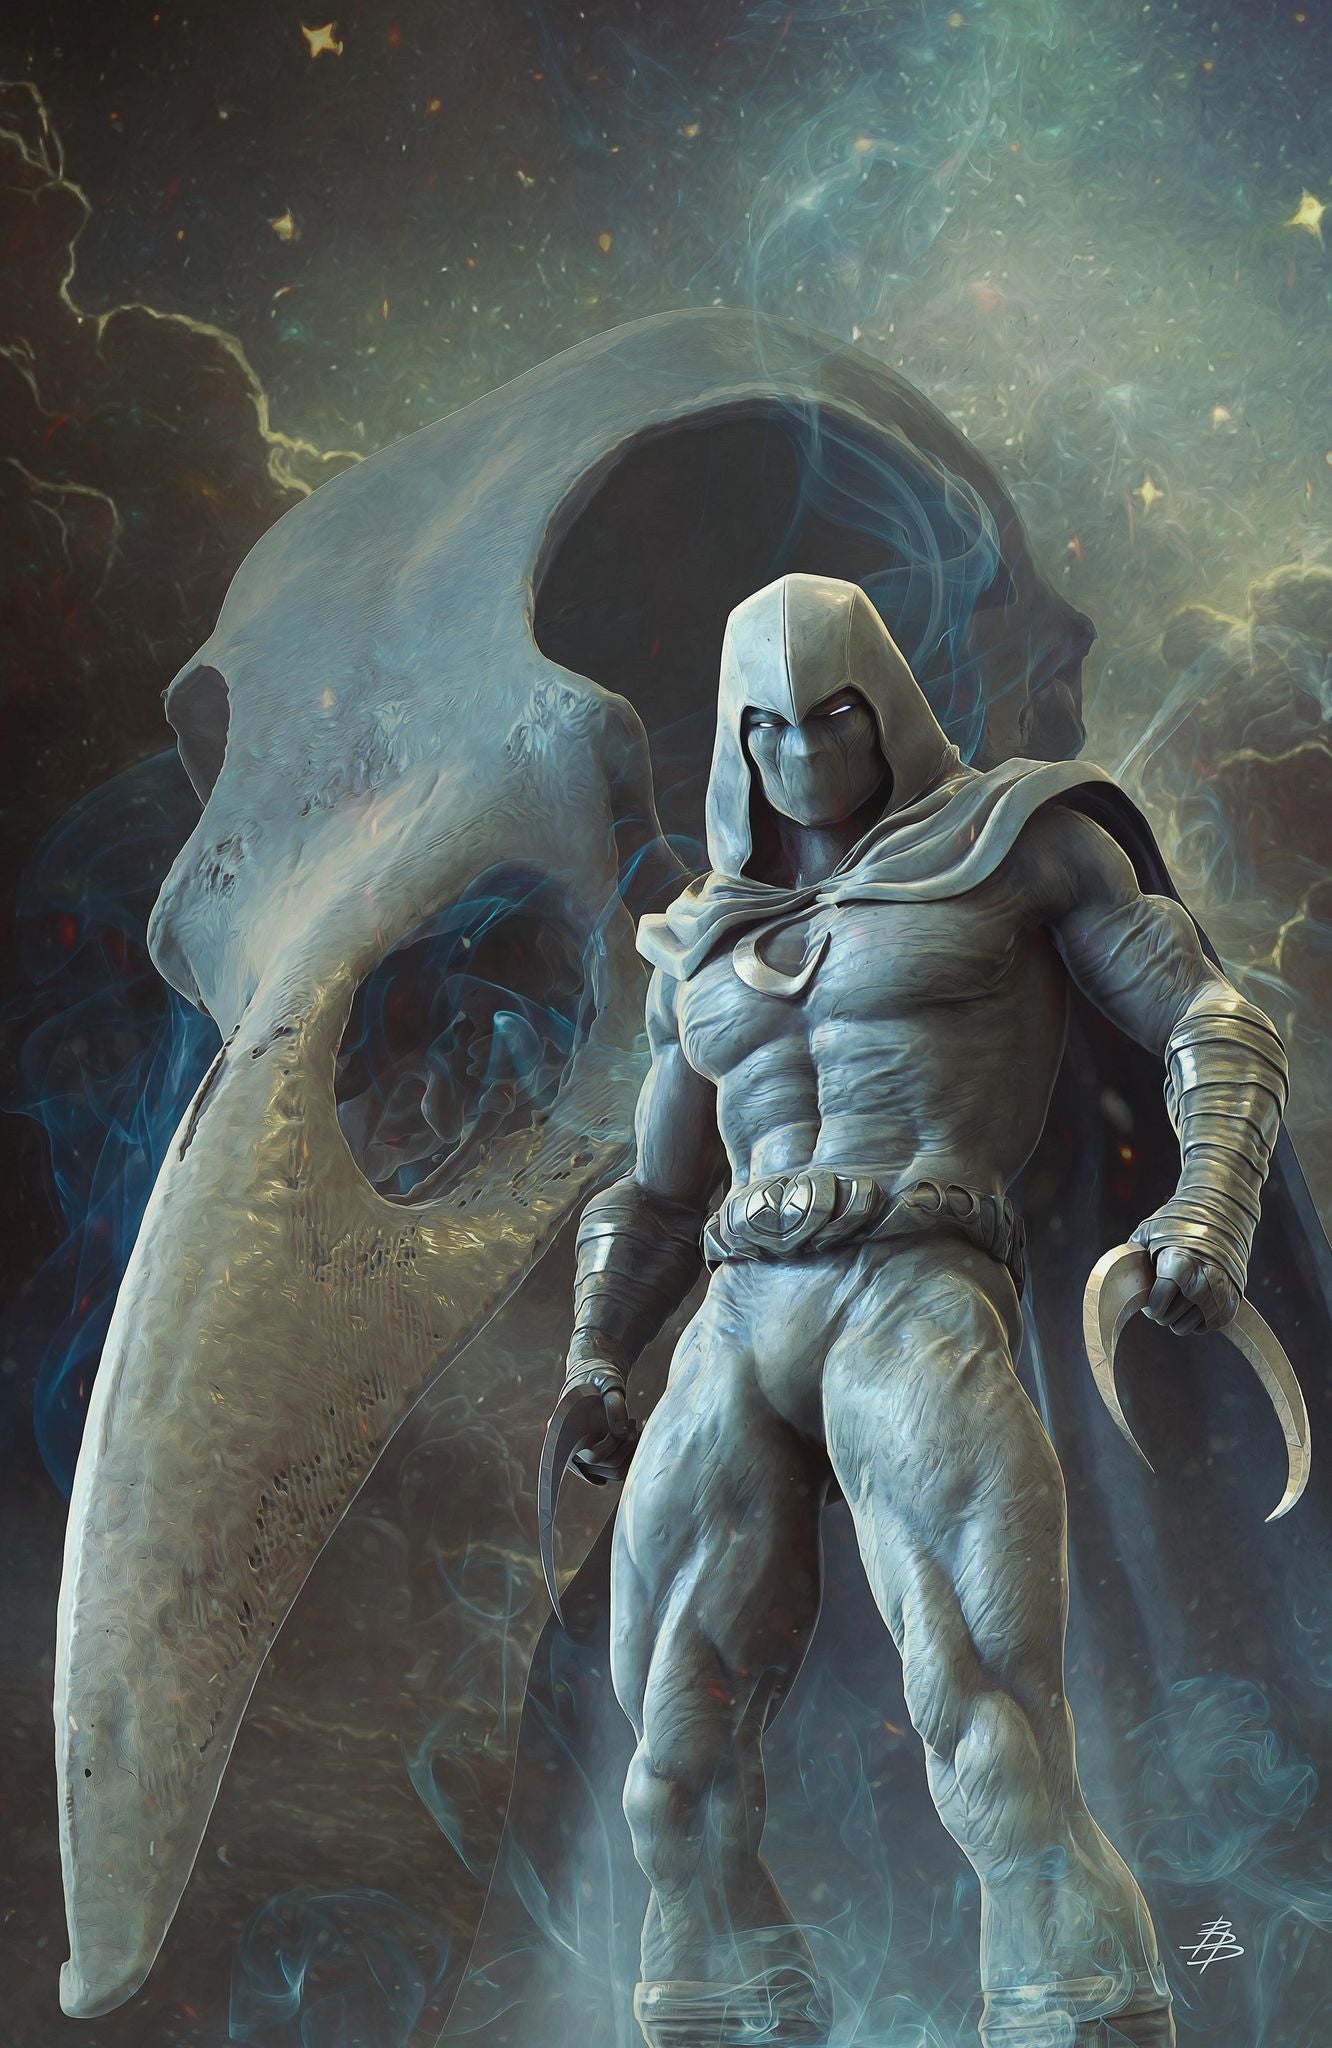 VENGEANCE OF MOON KNIGHT #1 BY BJORN BARENDS